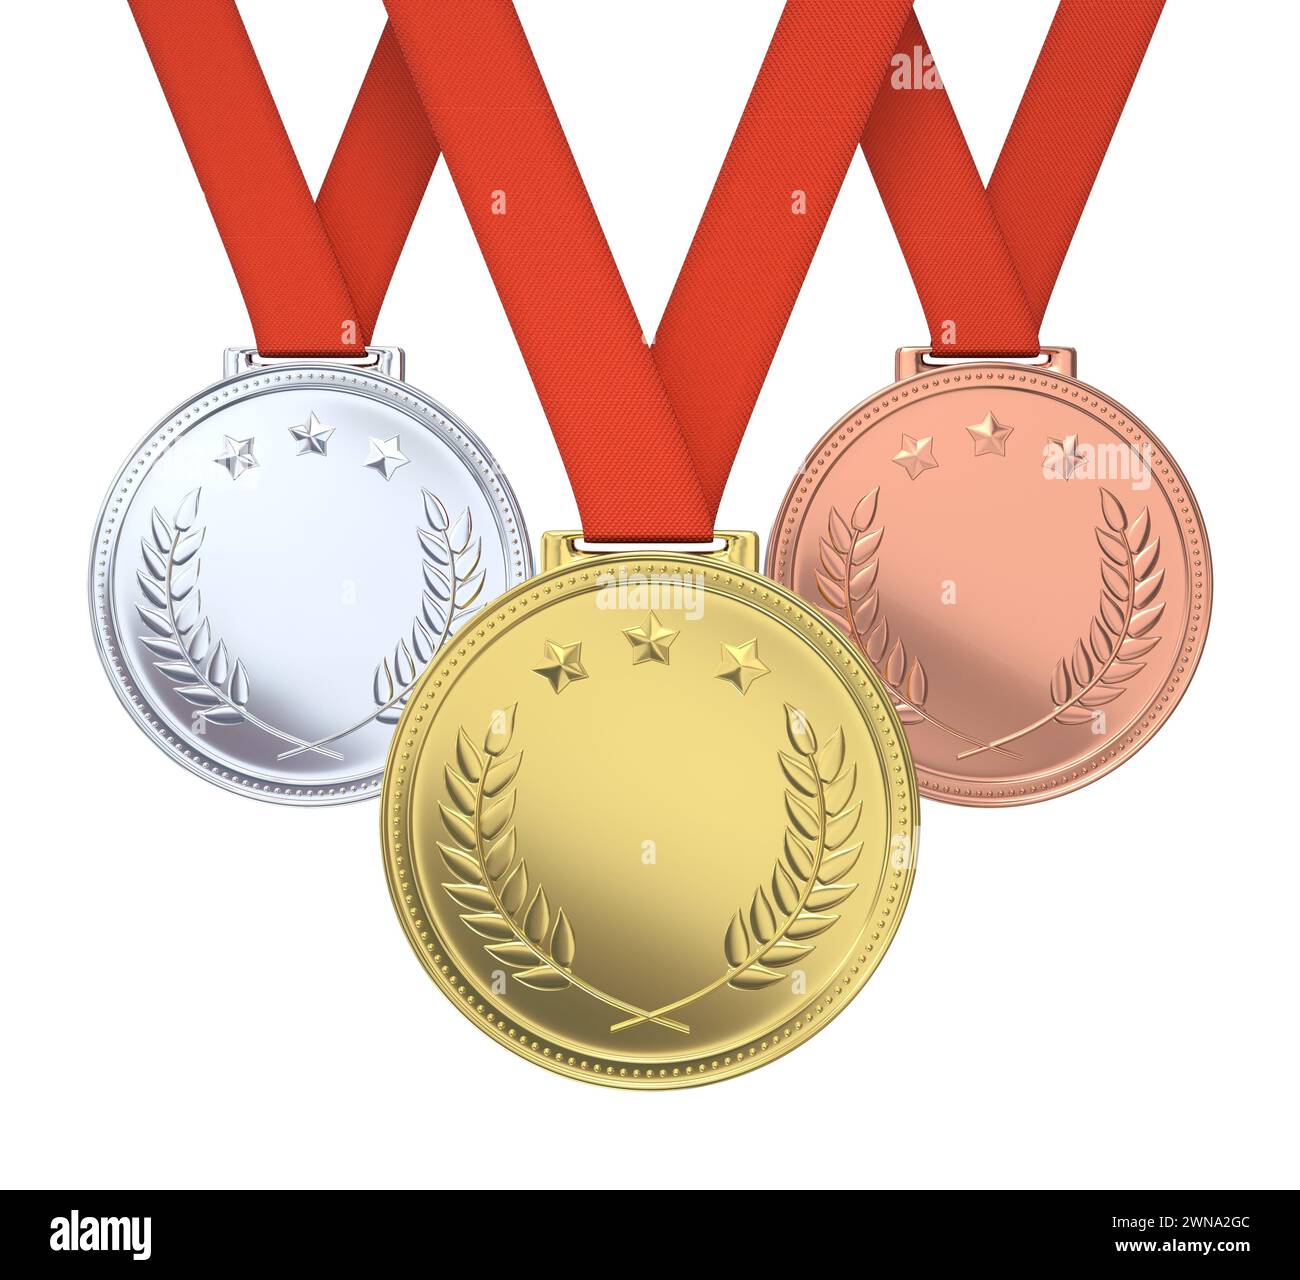 Golden, silver and bronze medals Stock Photo